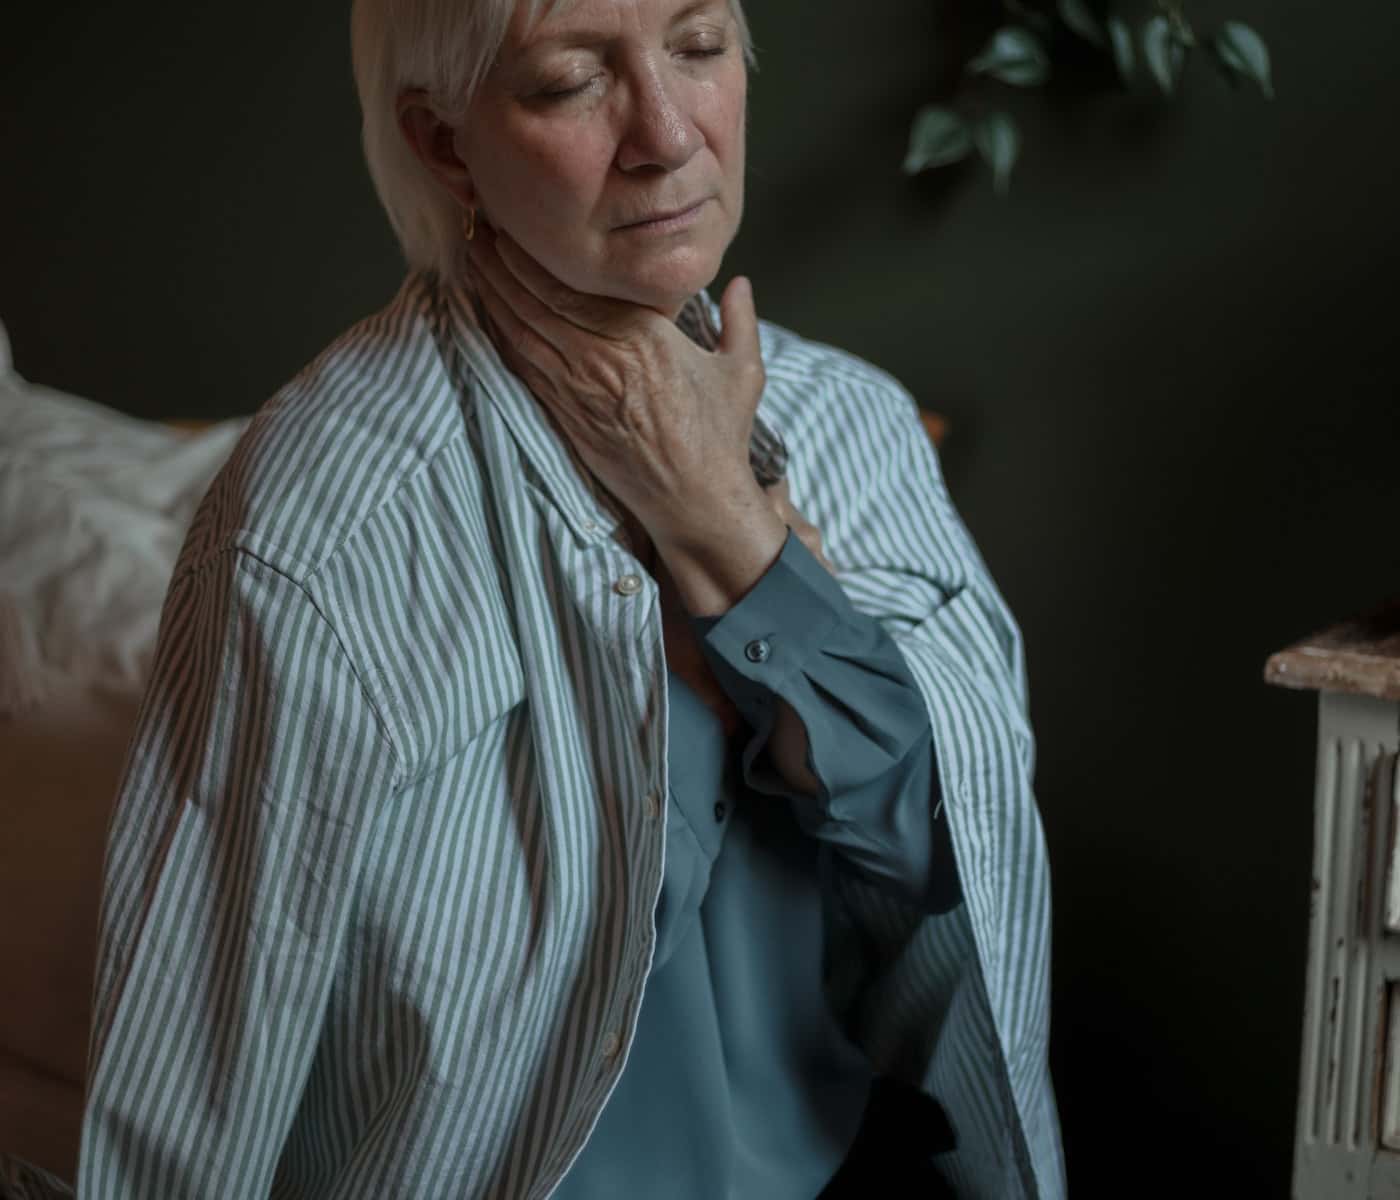 Menopause causes, Complications and treatments